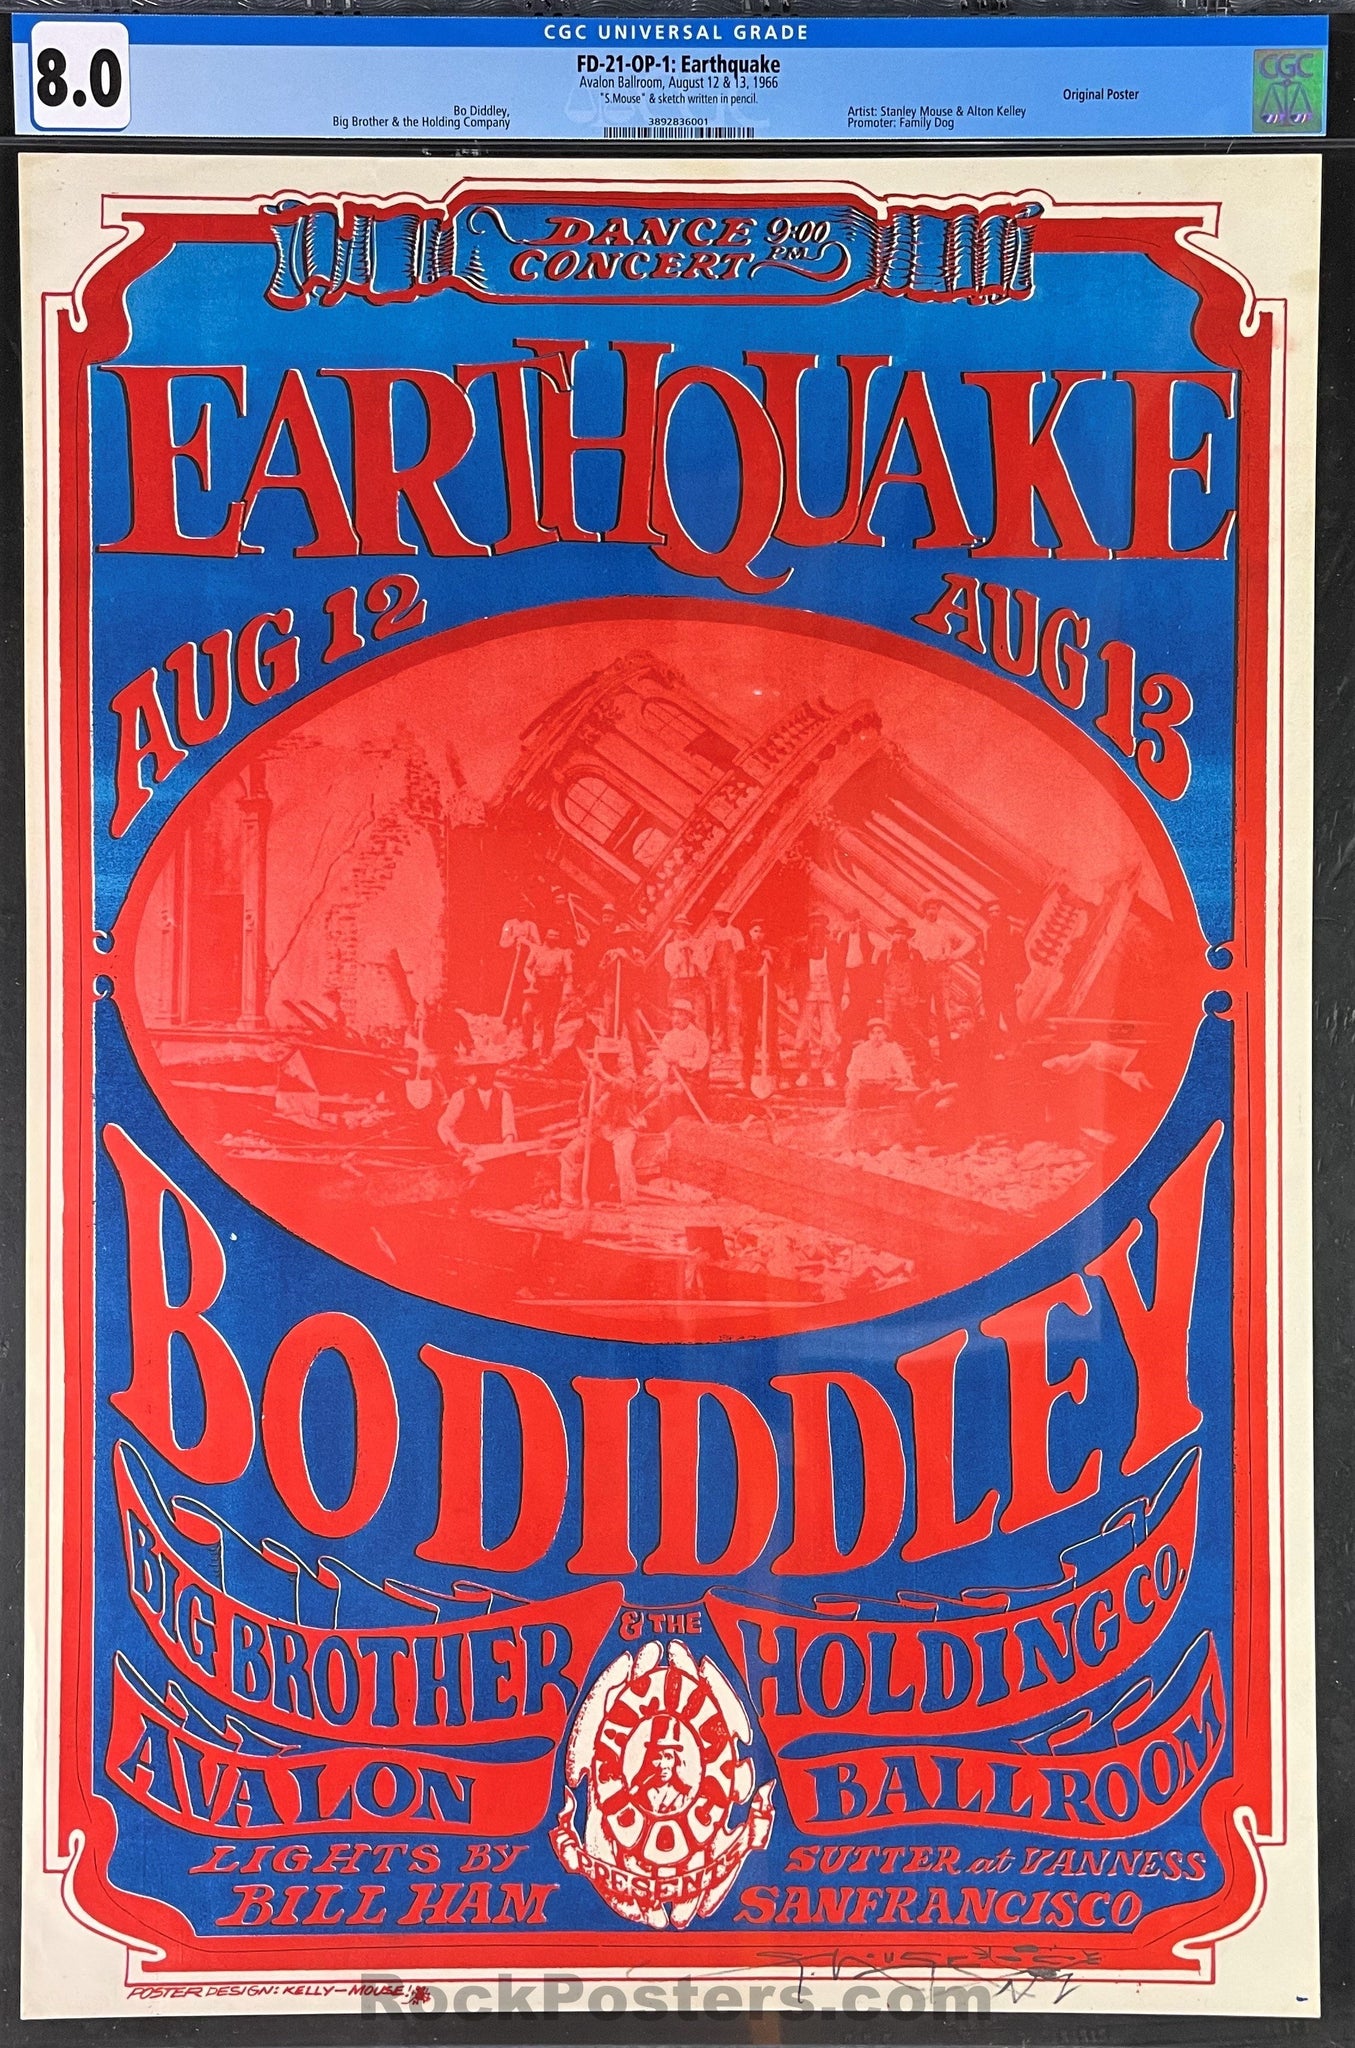 AUCTION - FD-21 - "Earthquake" Bo Diddley - Mouse Signed - 1966 Poster - Avalon Ballroom - CGC Graded 8.0